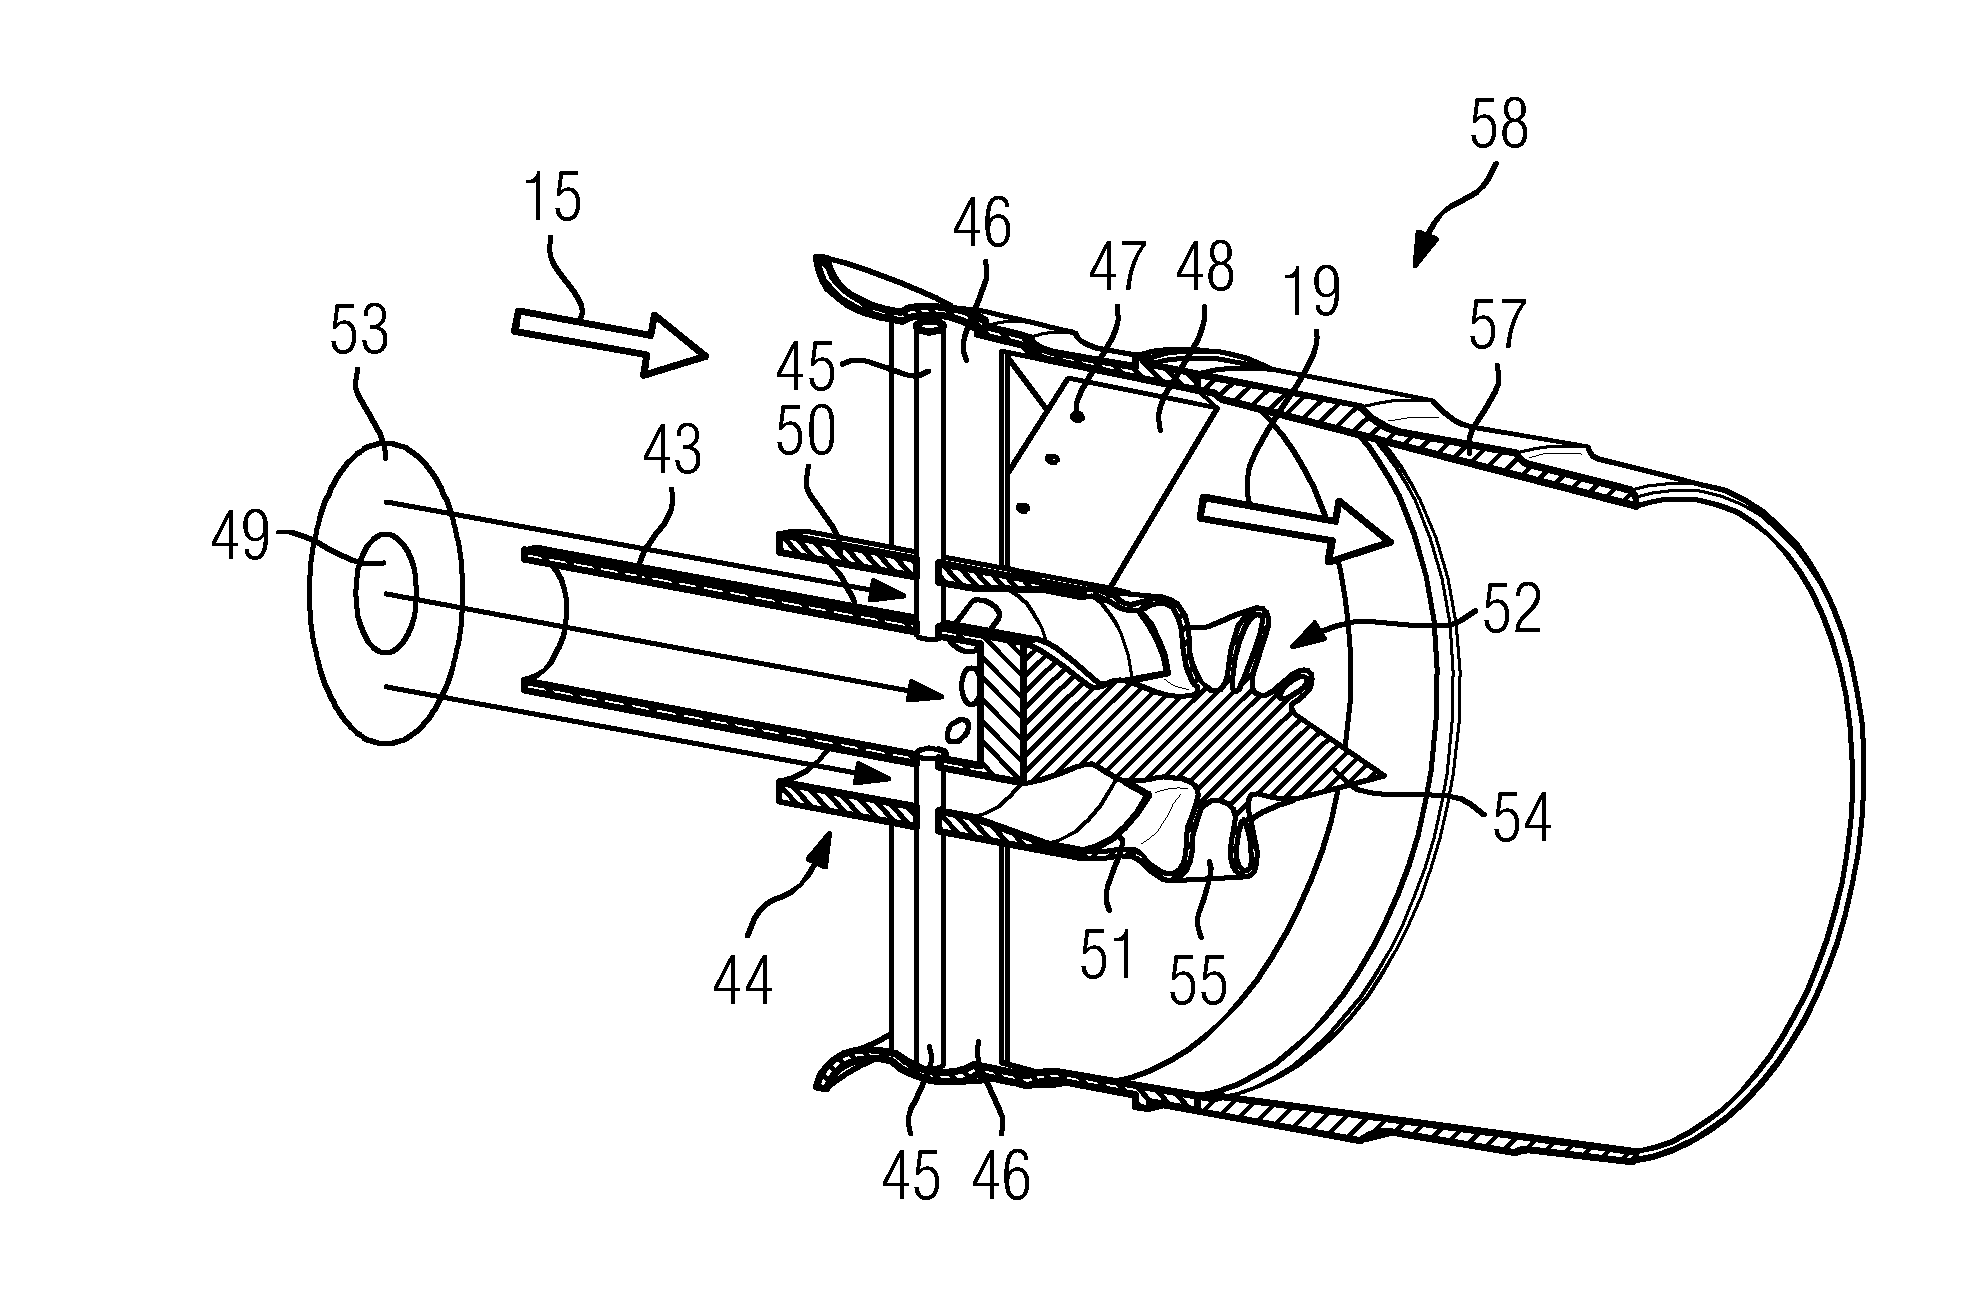 Fuel injector and swirler assembly with lobed mixer